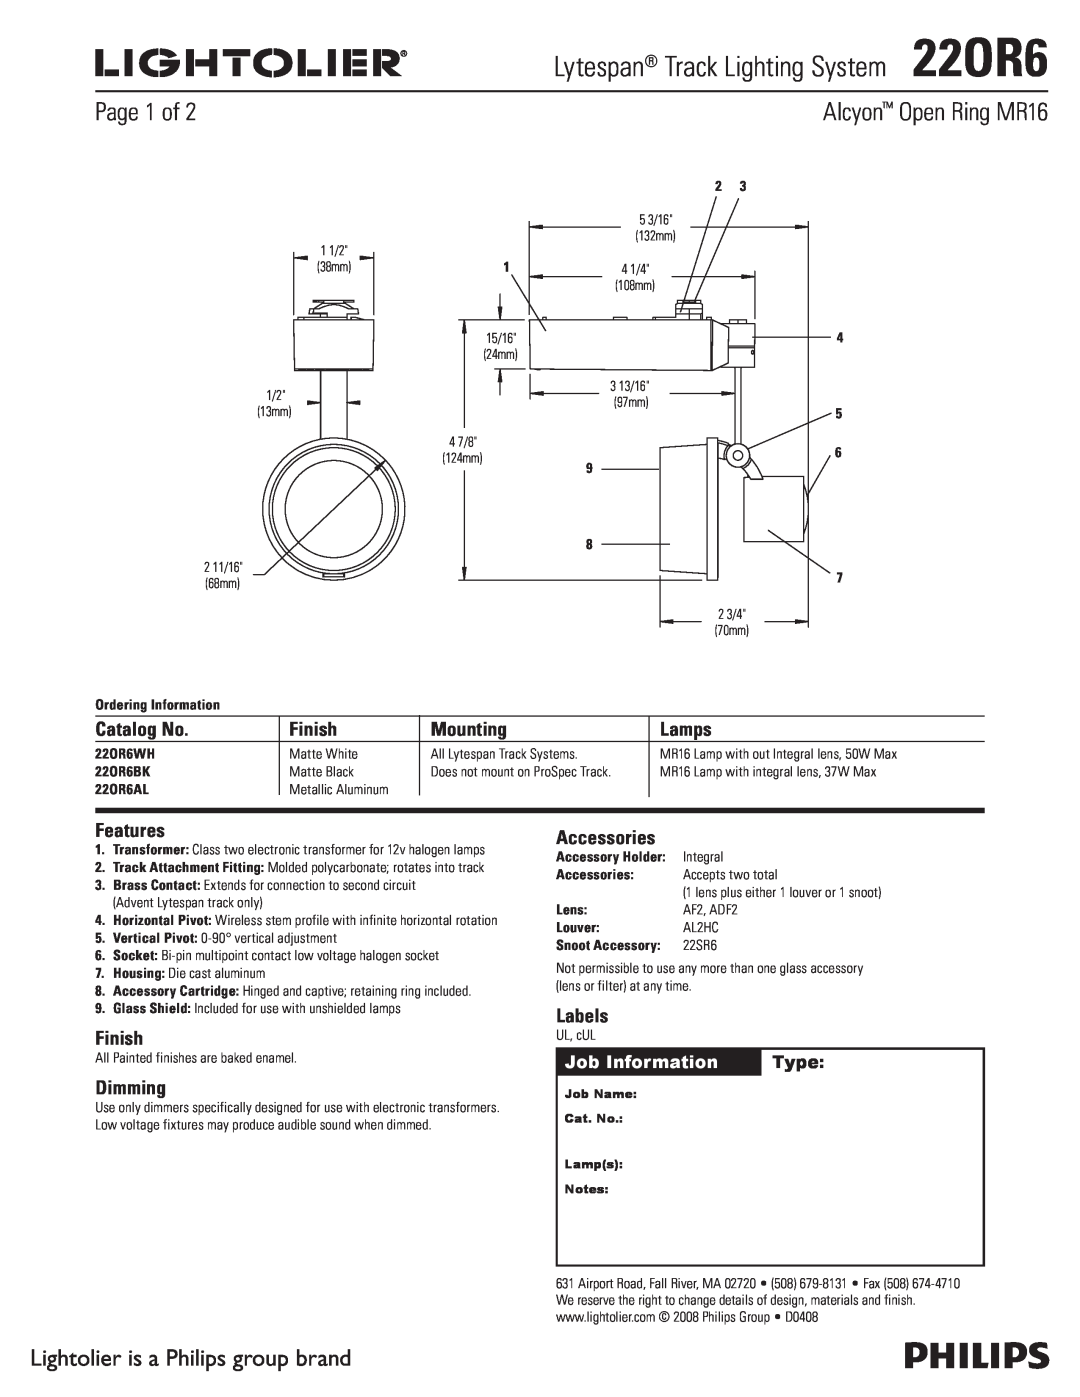 Lightolier manual Lytespan Track Lighting System22OR6, Page 1 of, Lightolier is a Philips group brand, Catalog No, Type 